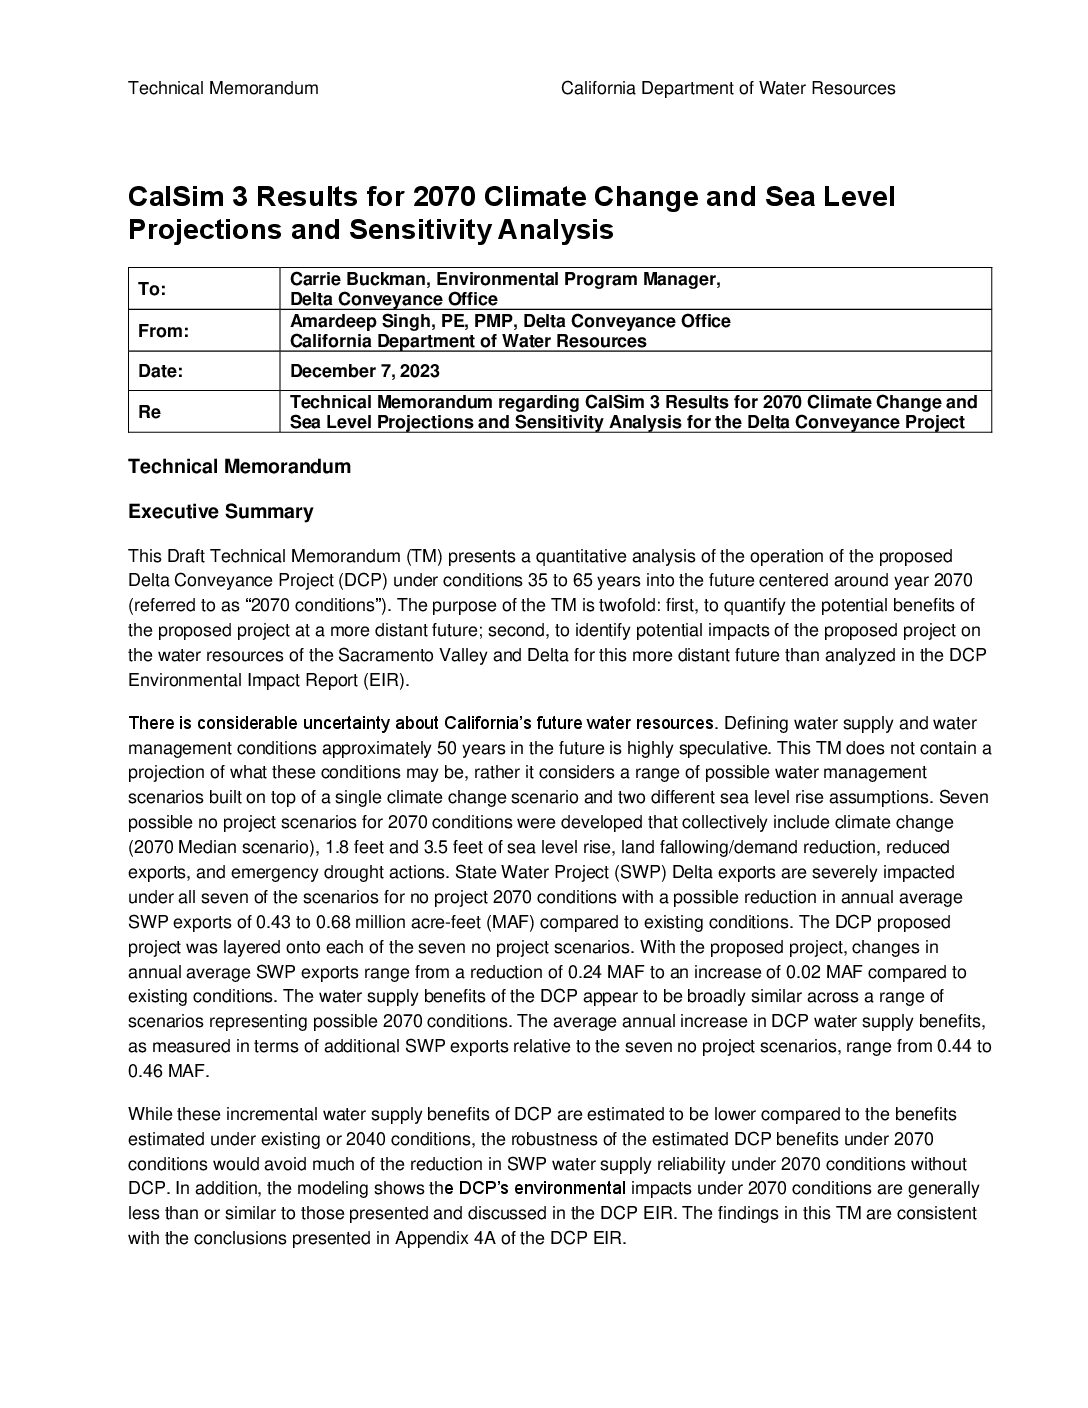 CalSim 3 Results for 2070 Climate Change and Sea Level Projections and Sensitivity Analysis